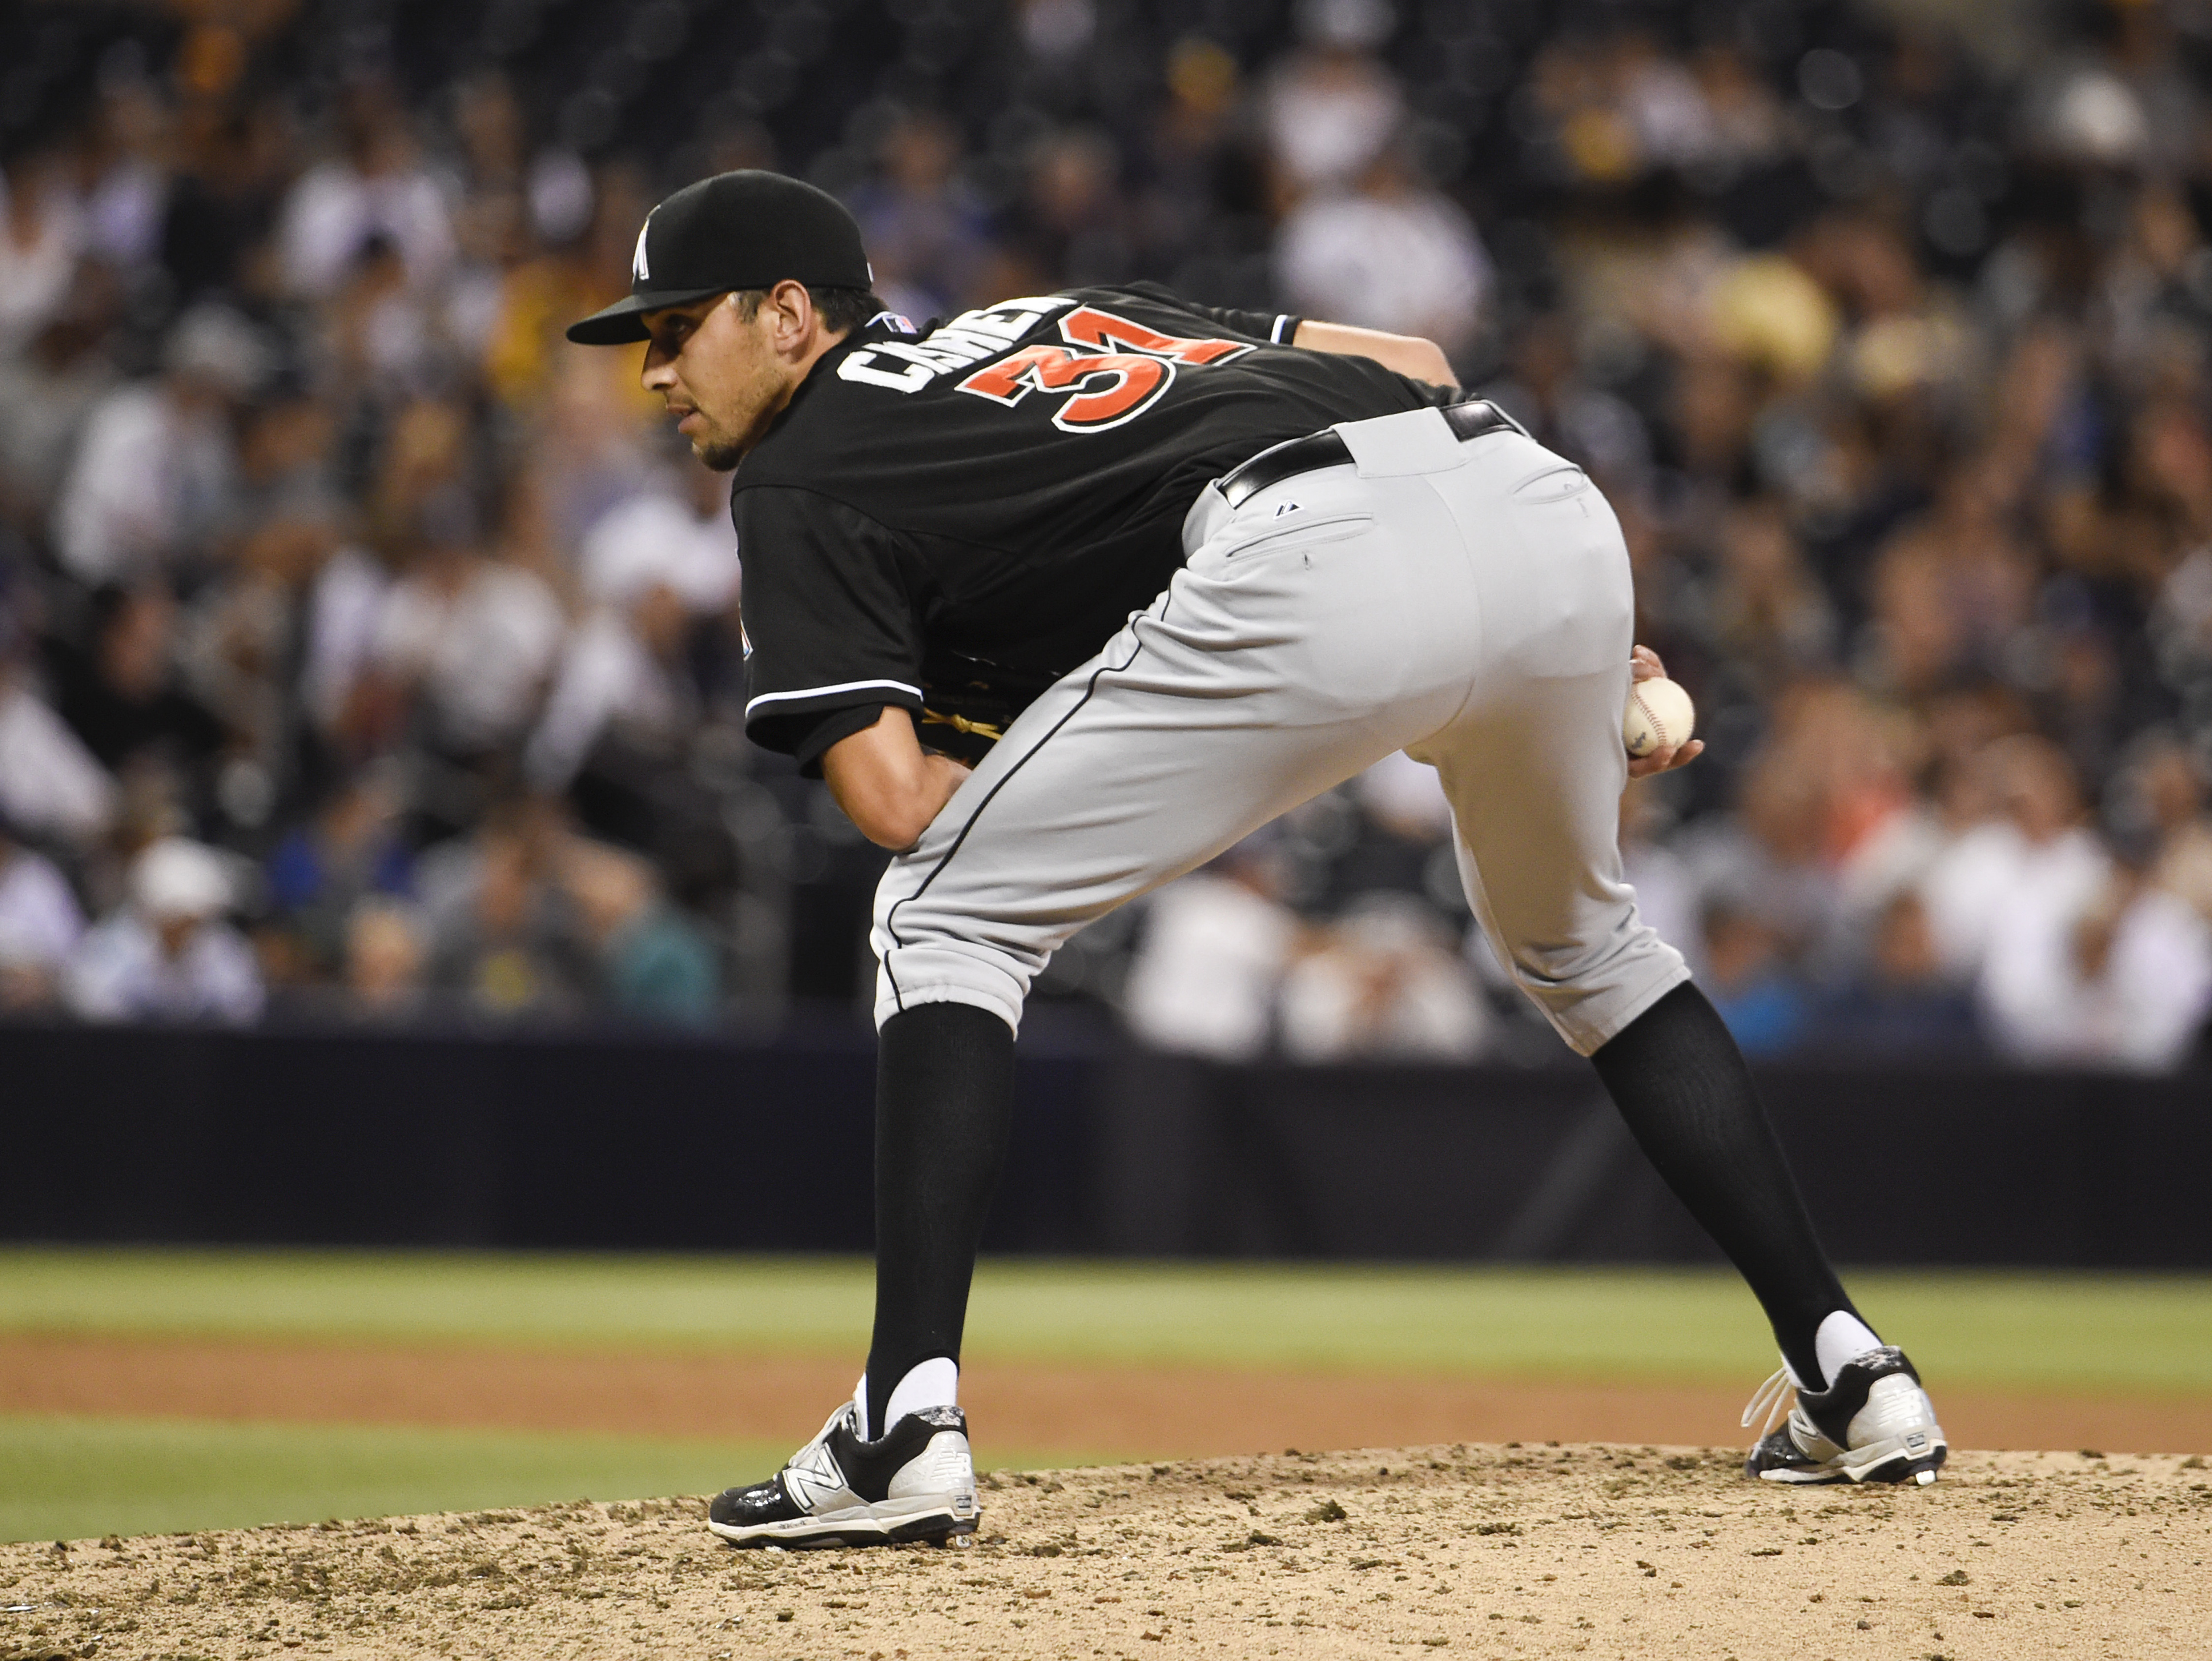 Steve Cishek #31 of the Miami Marlins pitches during a baseball game against the San Diego Padres at Petco Park July 23, 2015 in San Diego, California.